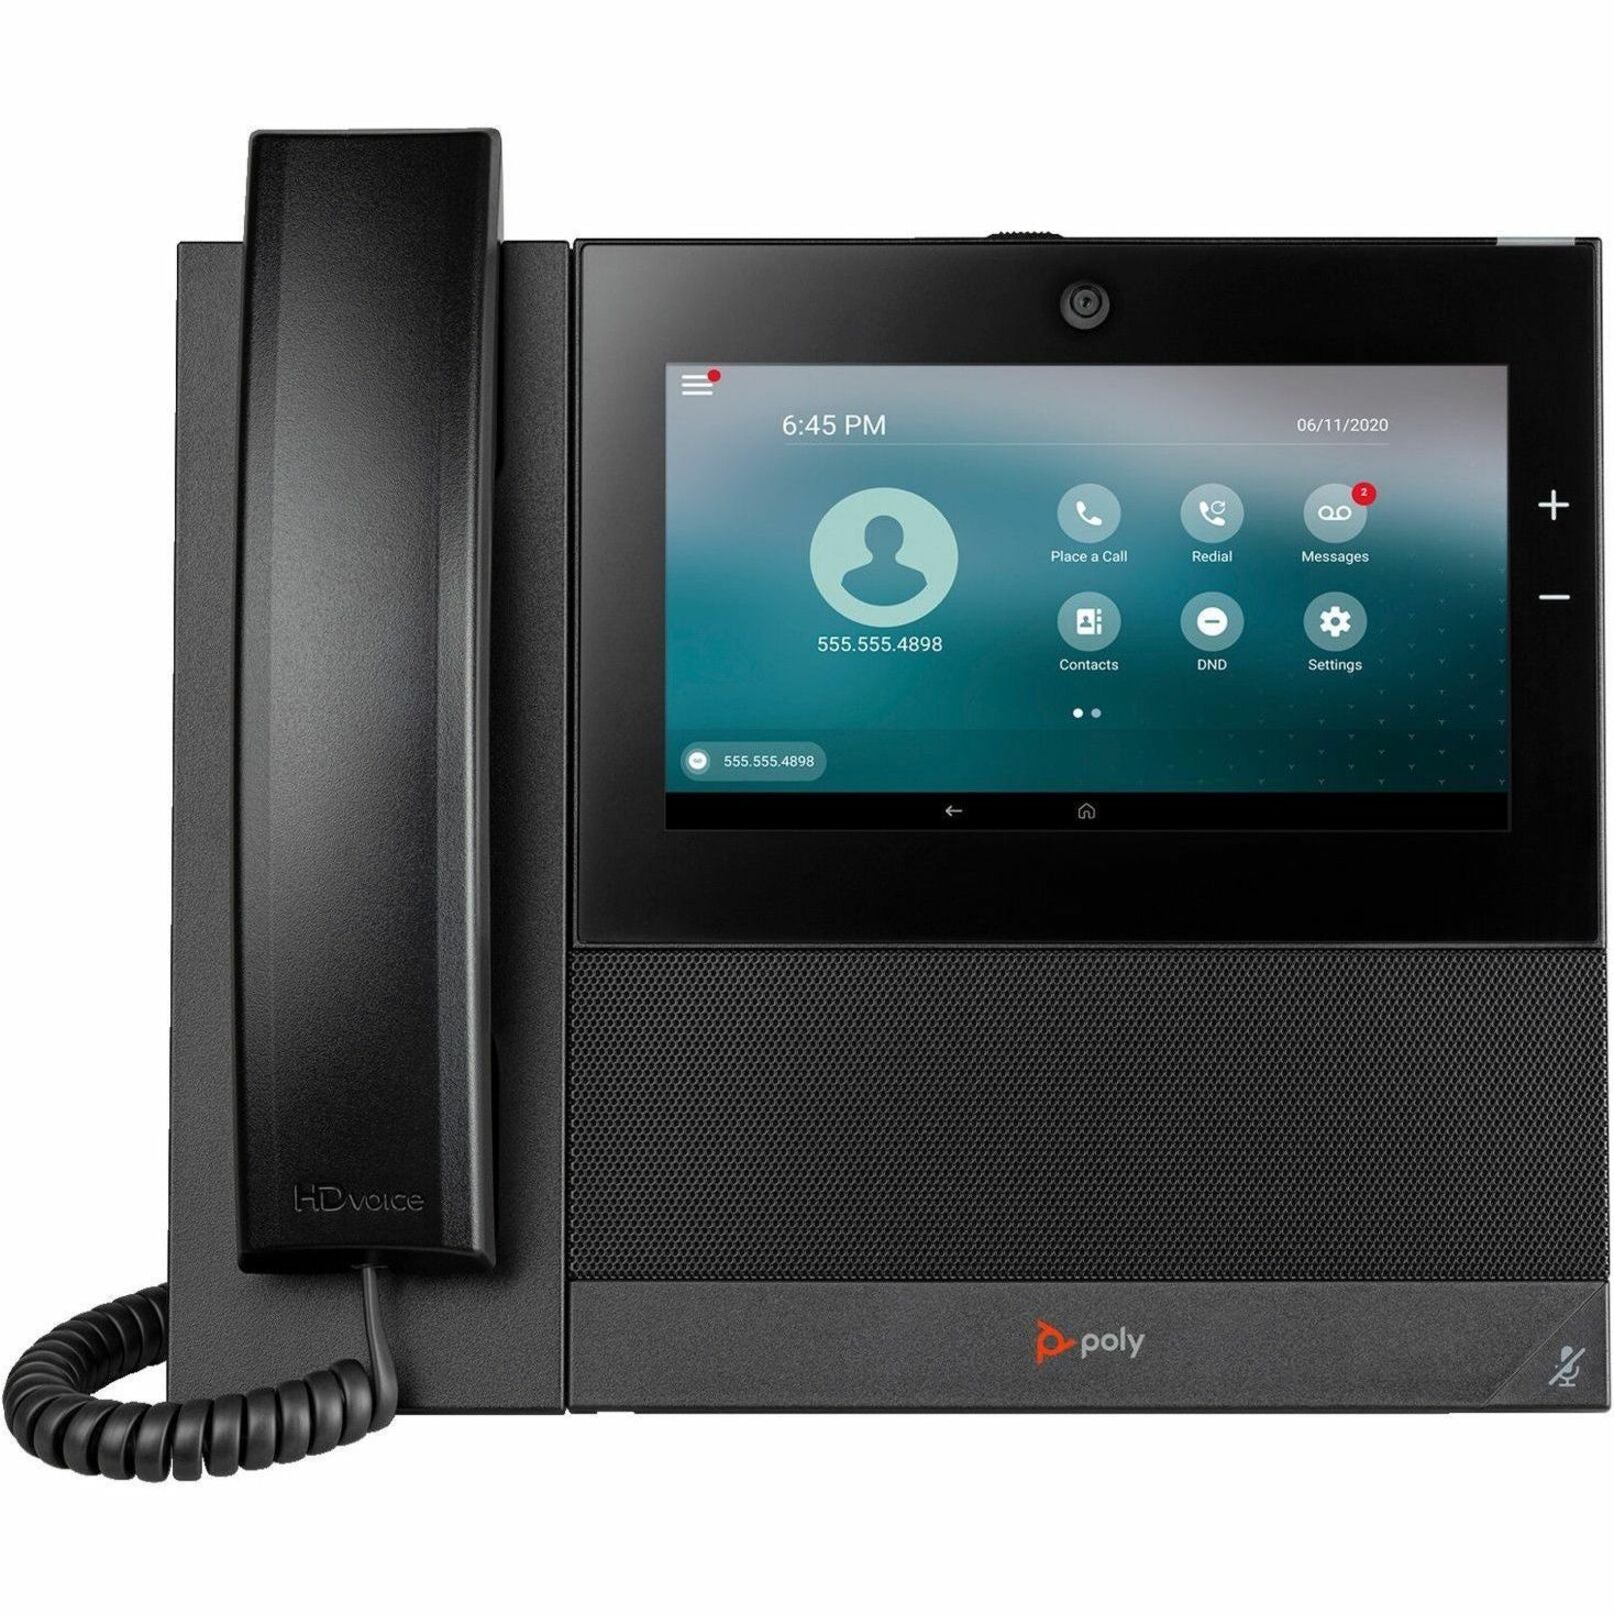 Poly 82Z83AA CCX 700 Business Media Phone with Open SIP and PoE-Enabled, 7" LCD Screen, Caller ID, Speakerphone, Wi-Fi, Bluetooth